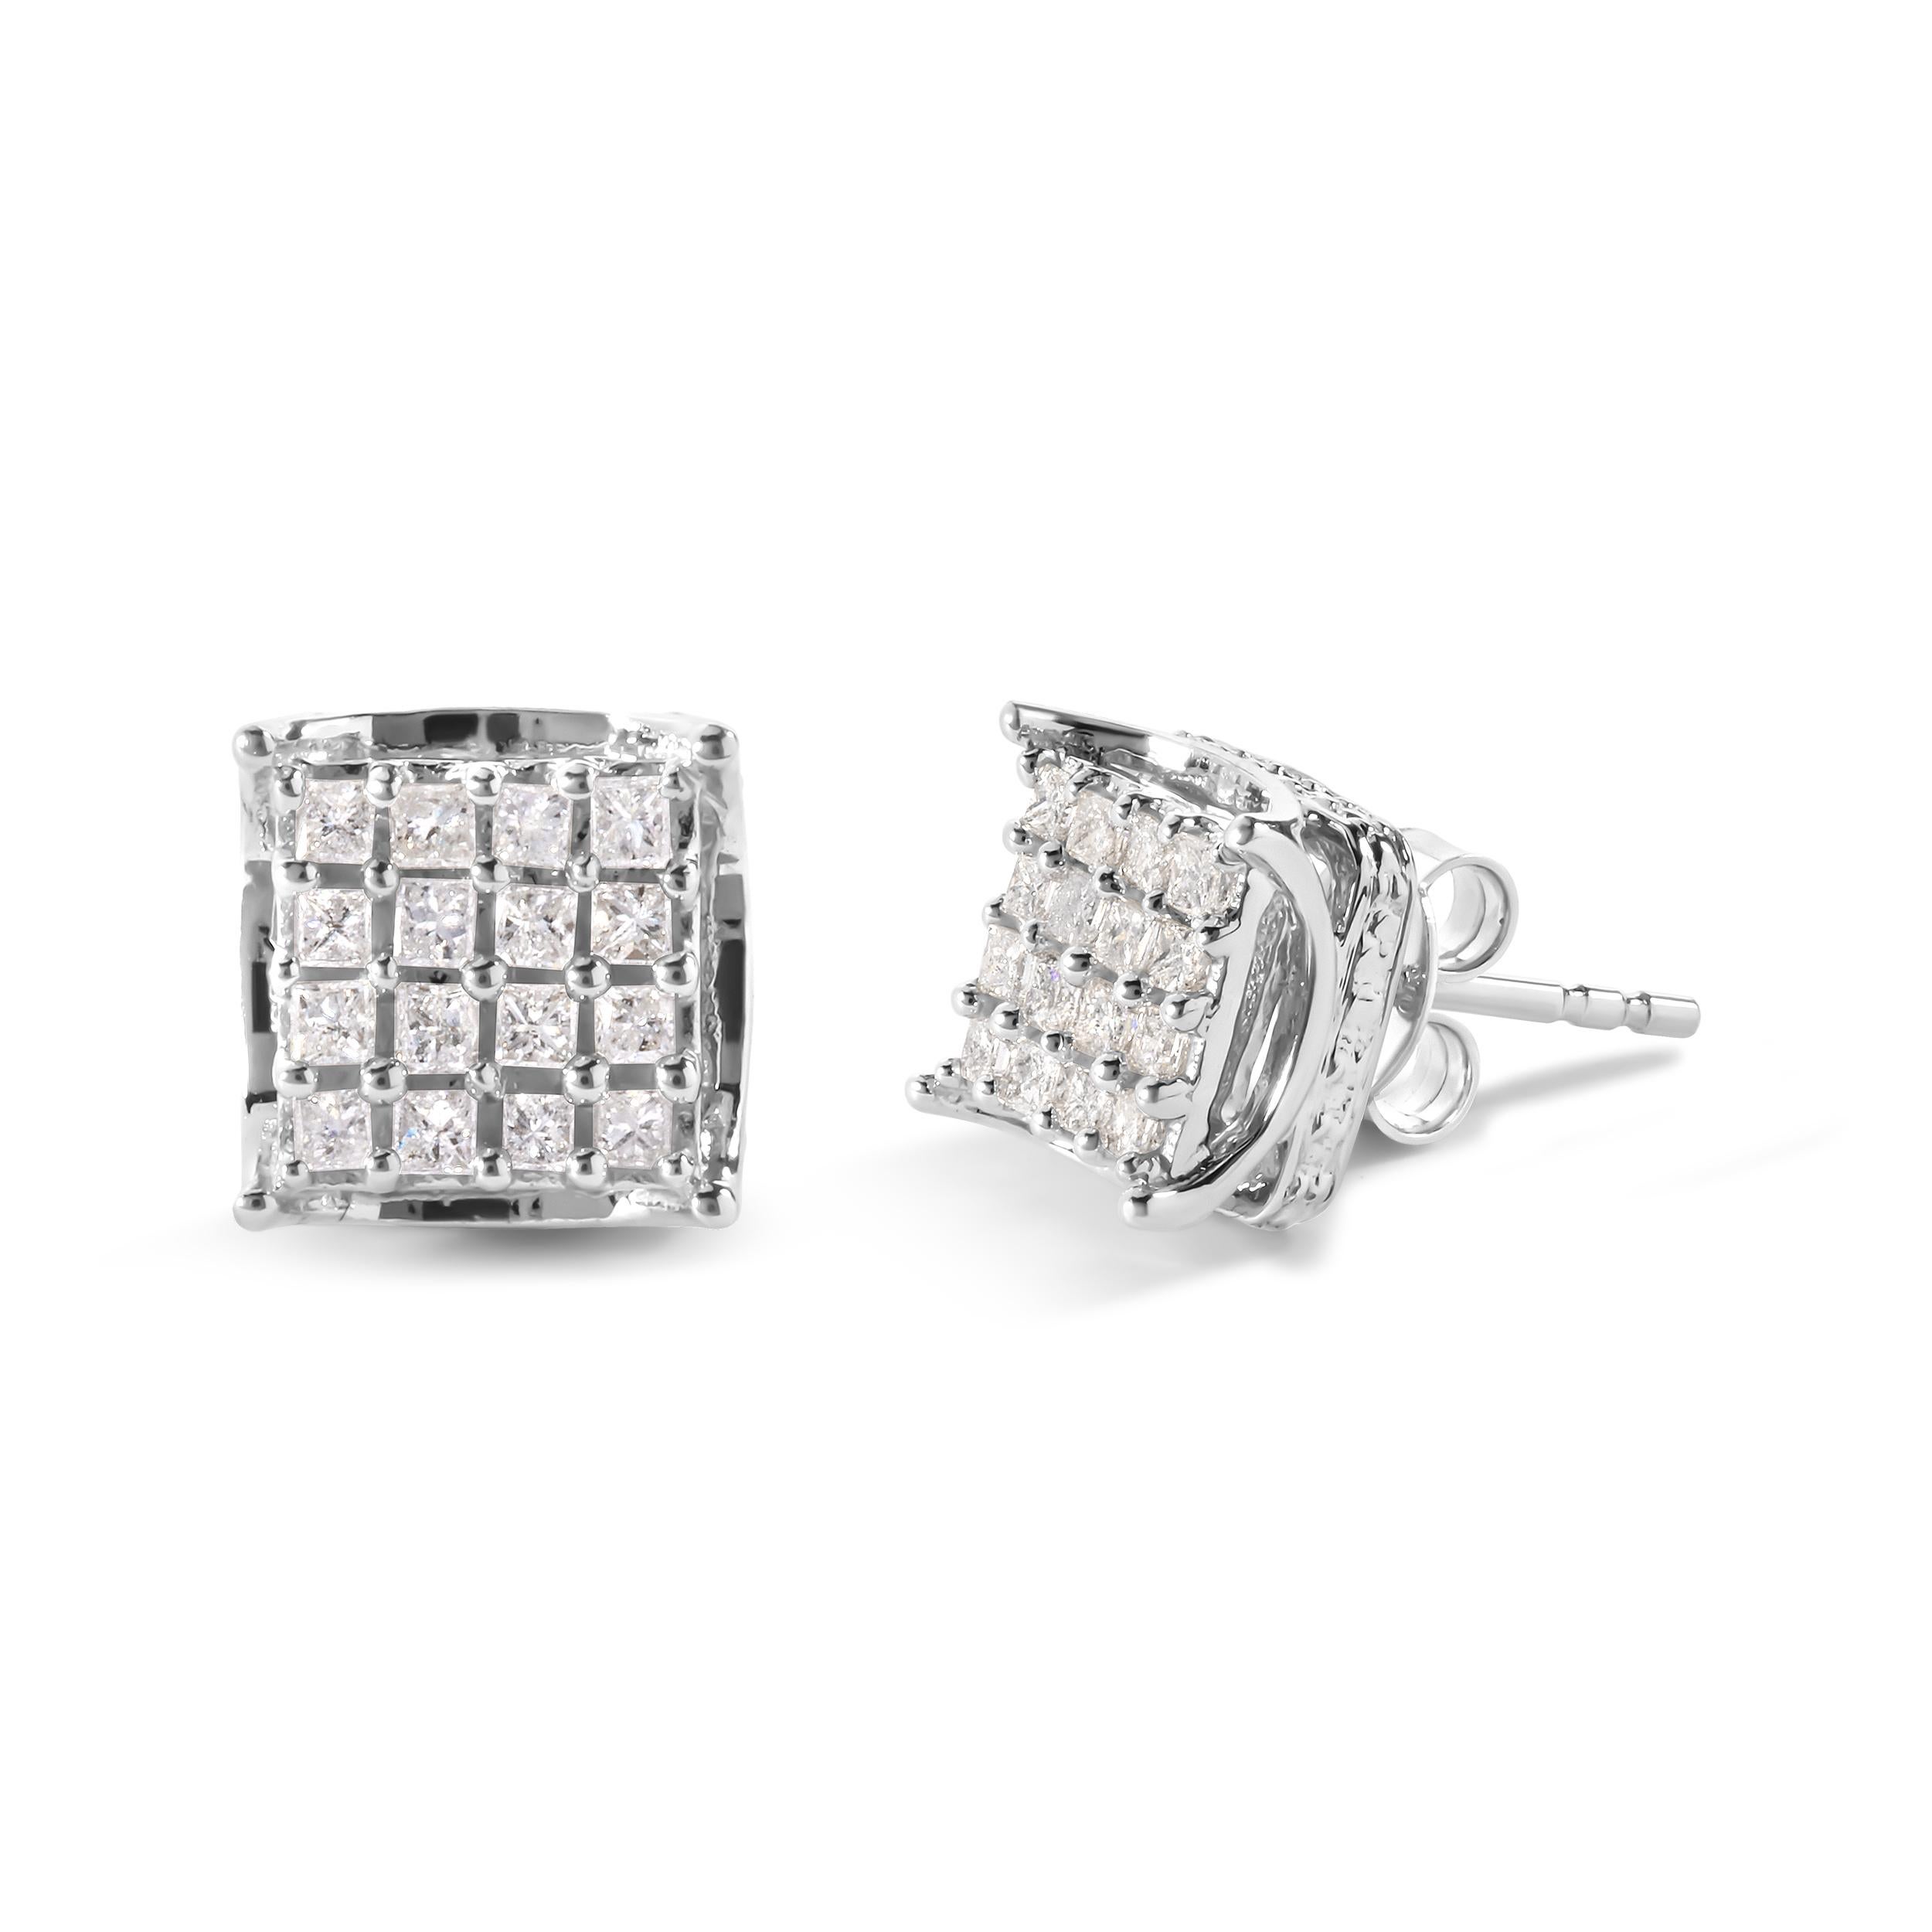 Indulge in the ultimate luxury with these stunning 10K White Gold Princess Diamond Classic Composite Stud Earrings. Perfect for any occasion, these earrings boast a total weight of 1/2 cttw and 32 dazzling diamonds that are carefully set in a prong